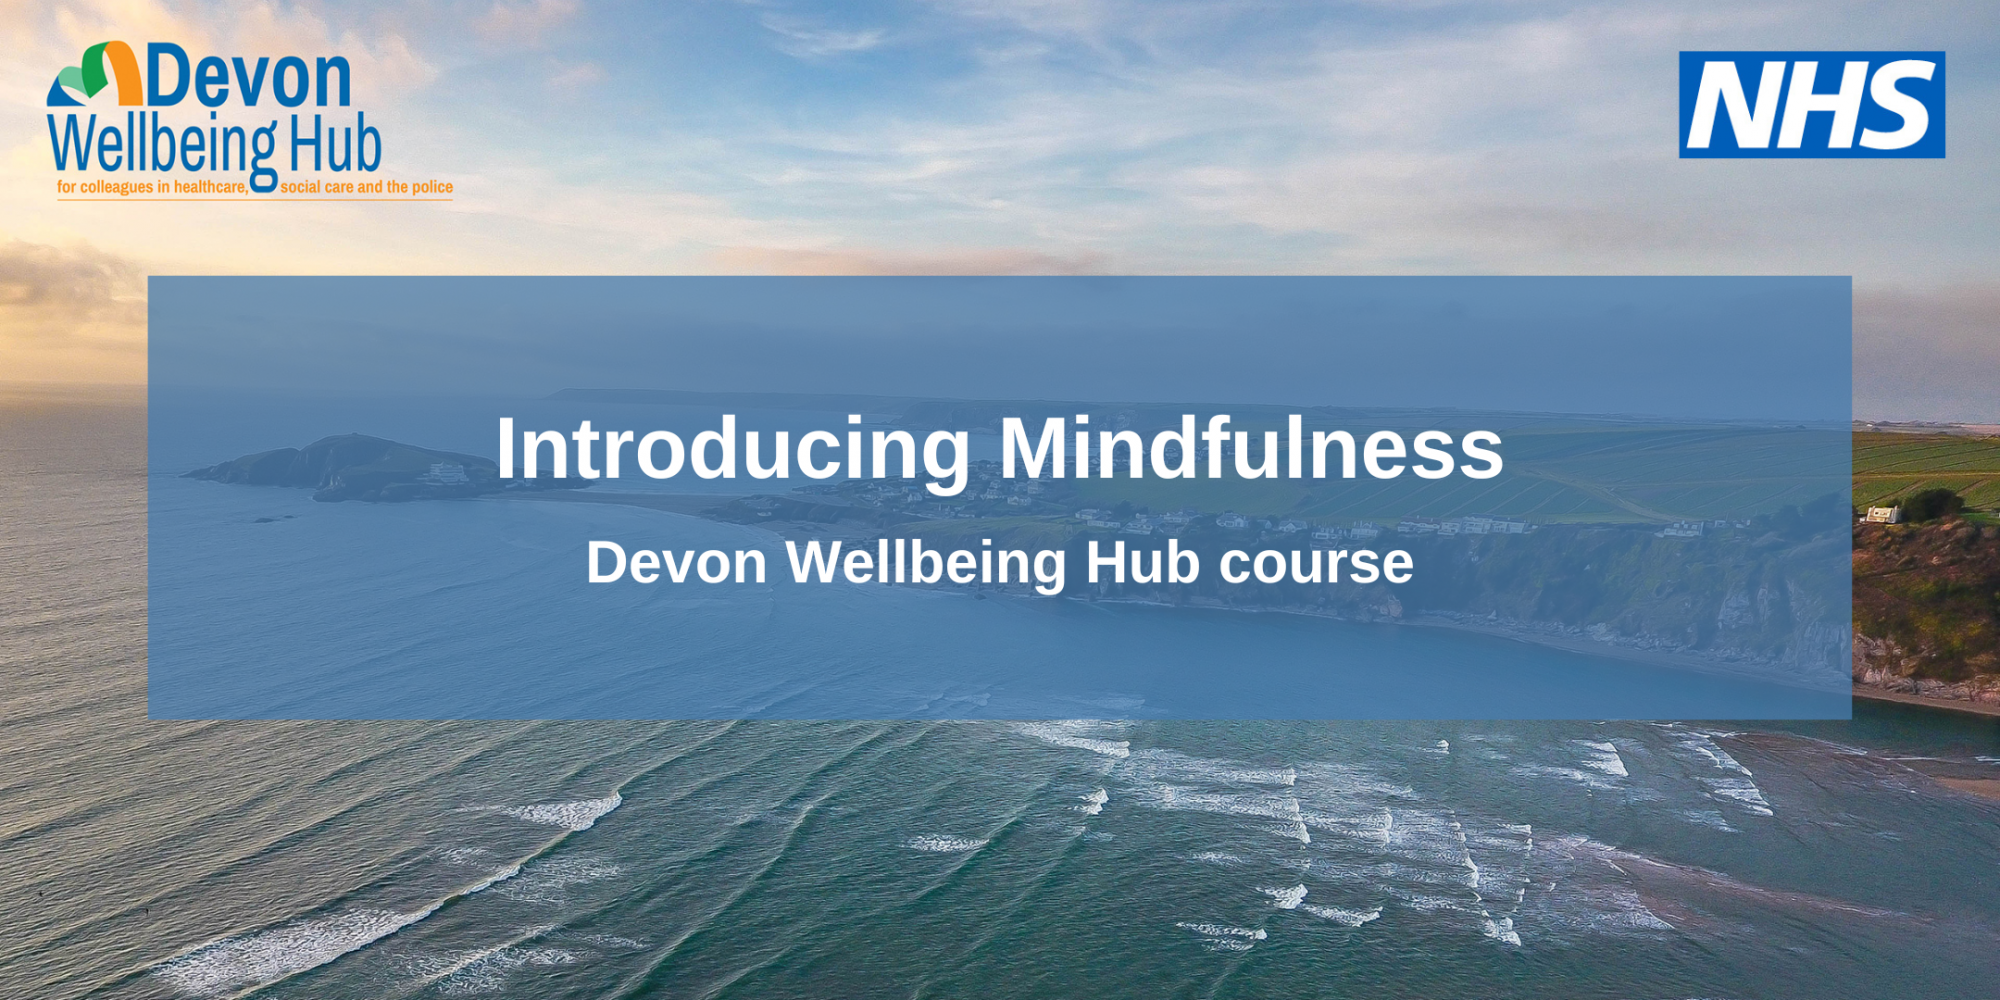 Sign up for the Devon Wellbeing Hub’s new Introducing Mindfulness Course